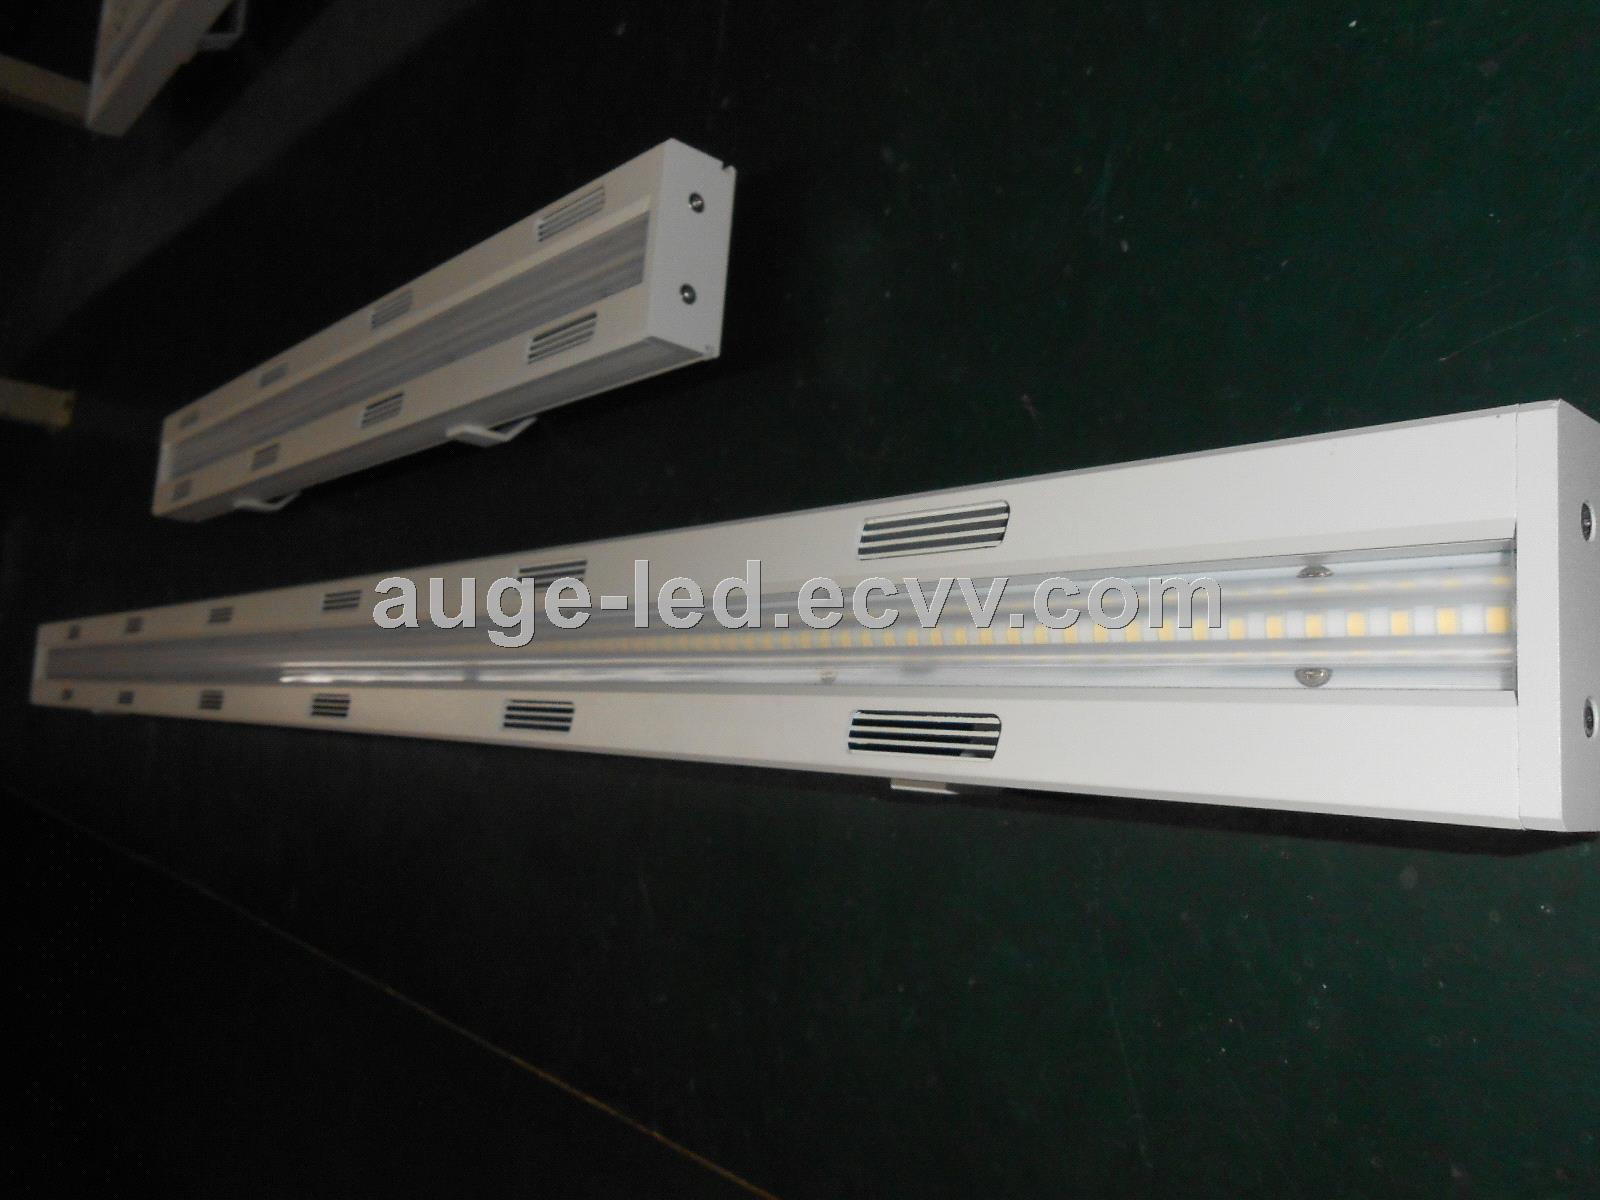 600mm 50W led linear high bay light 06m linear industrial lighting for warehouse 010V dimming line trunking system